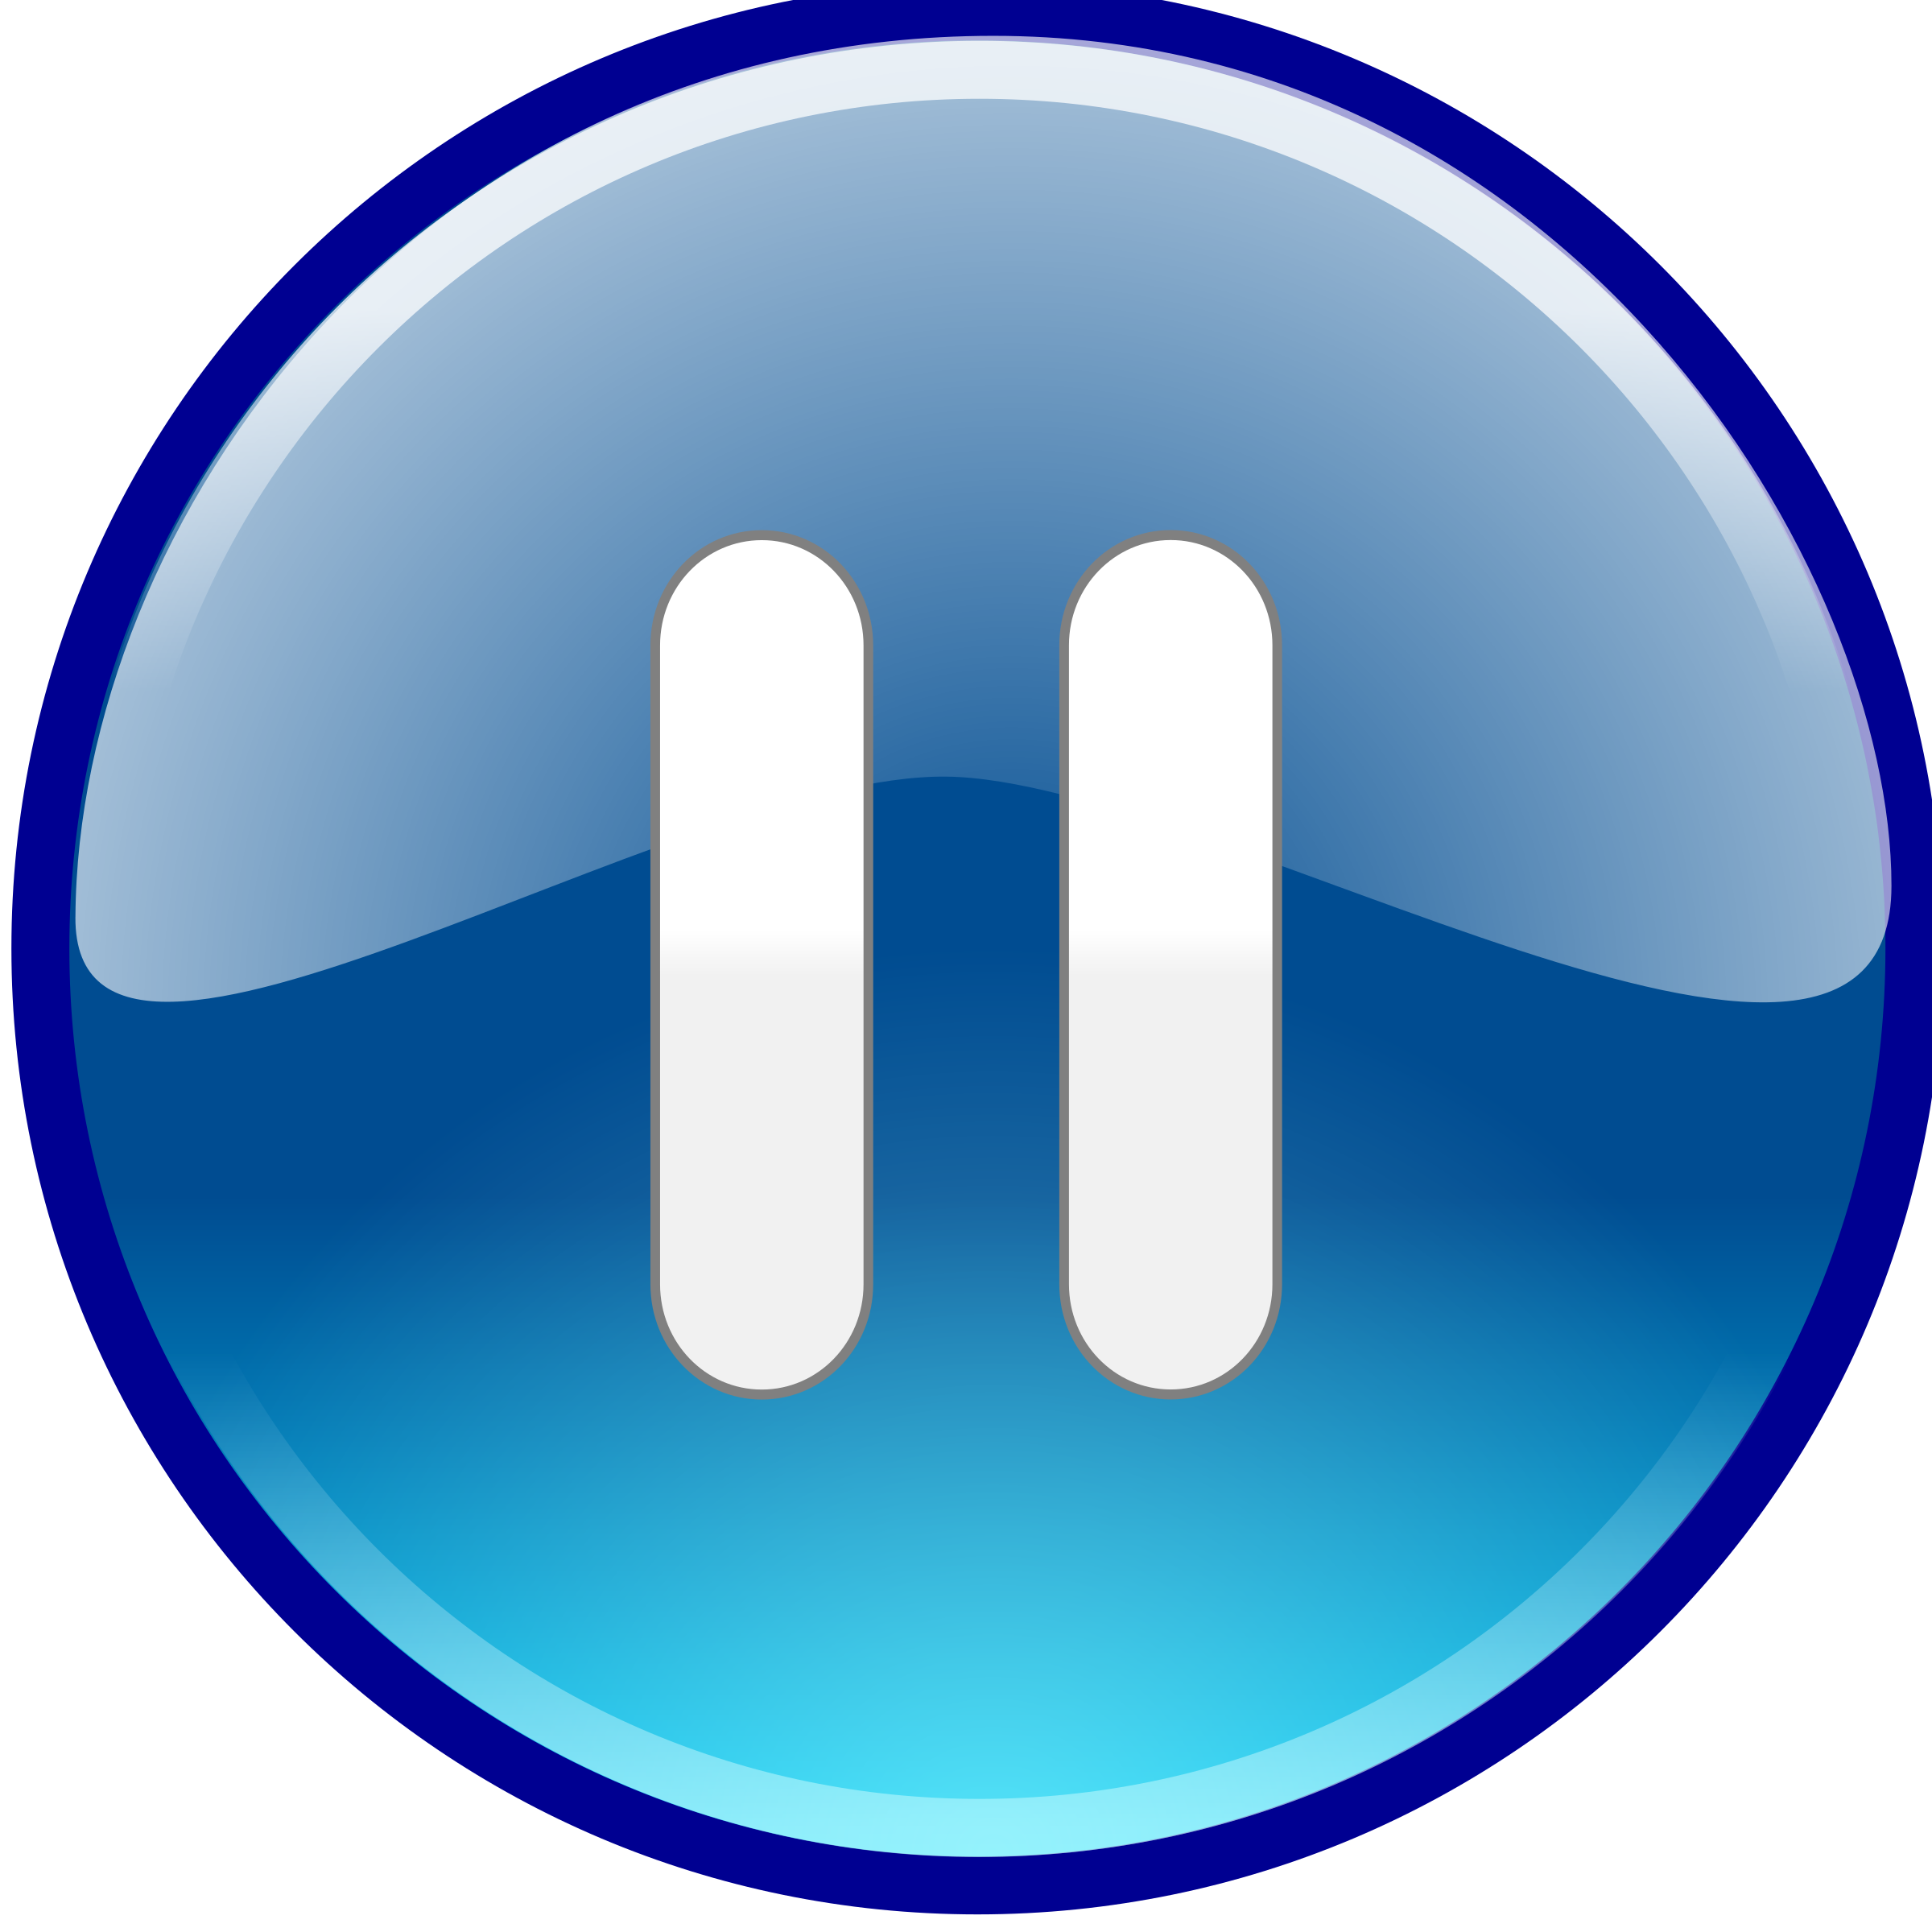 Clipart - Windows Media Player Pause Button